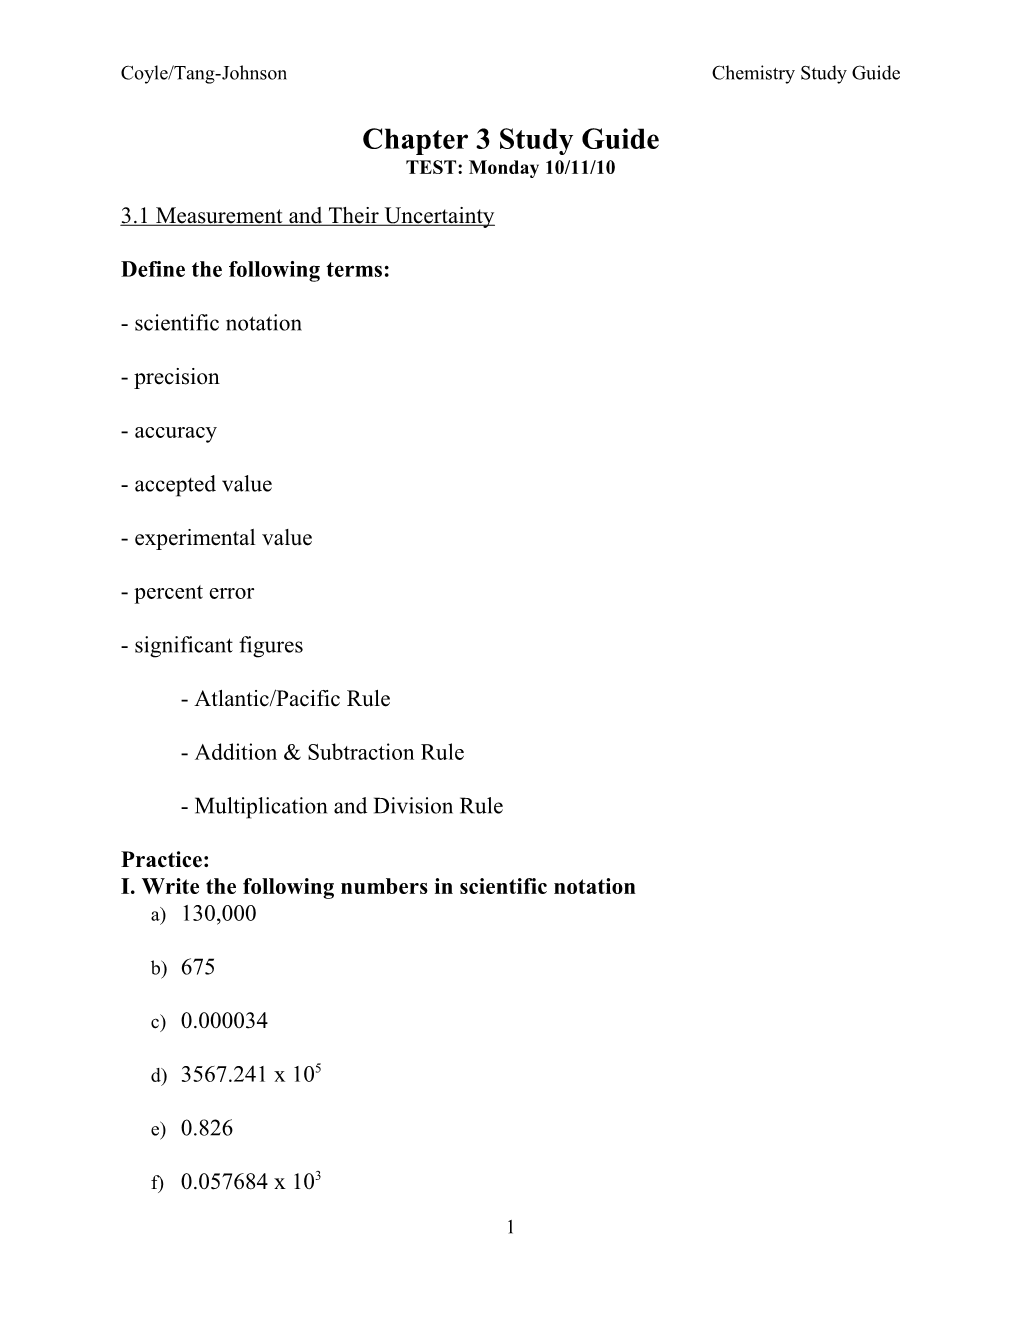 Coyle/Tang-Johnsonchemistry Study Guide